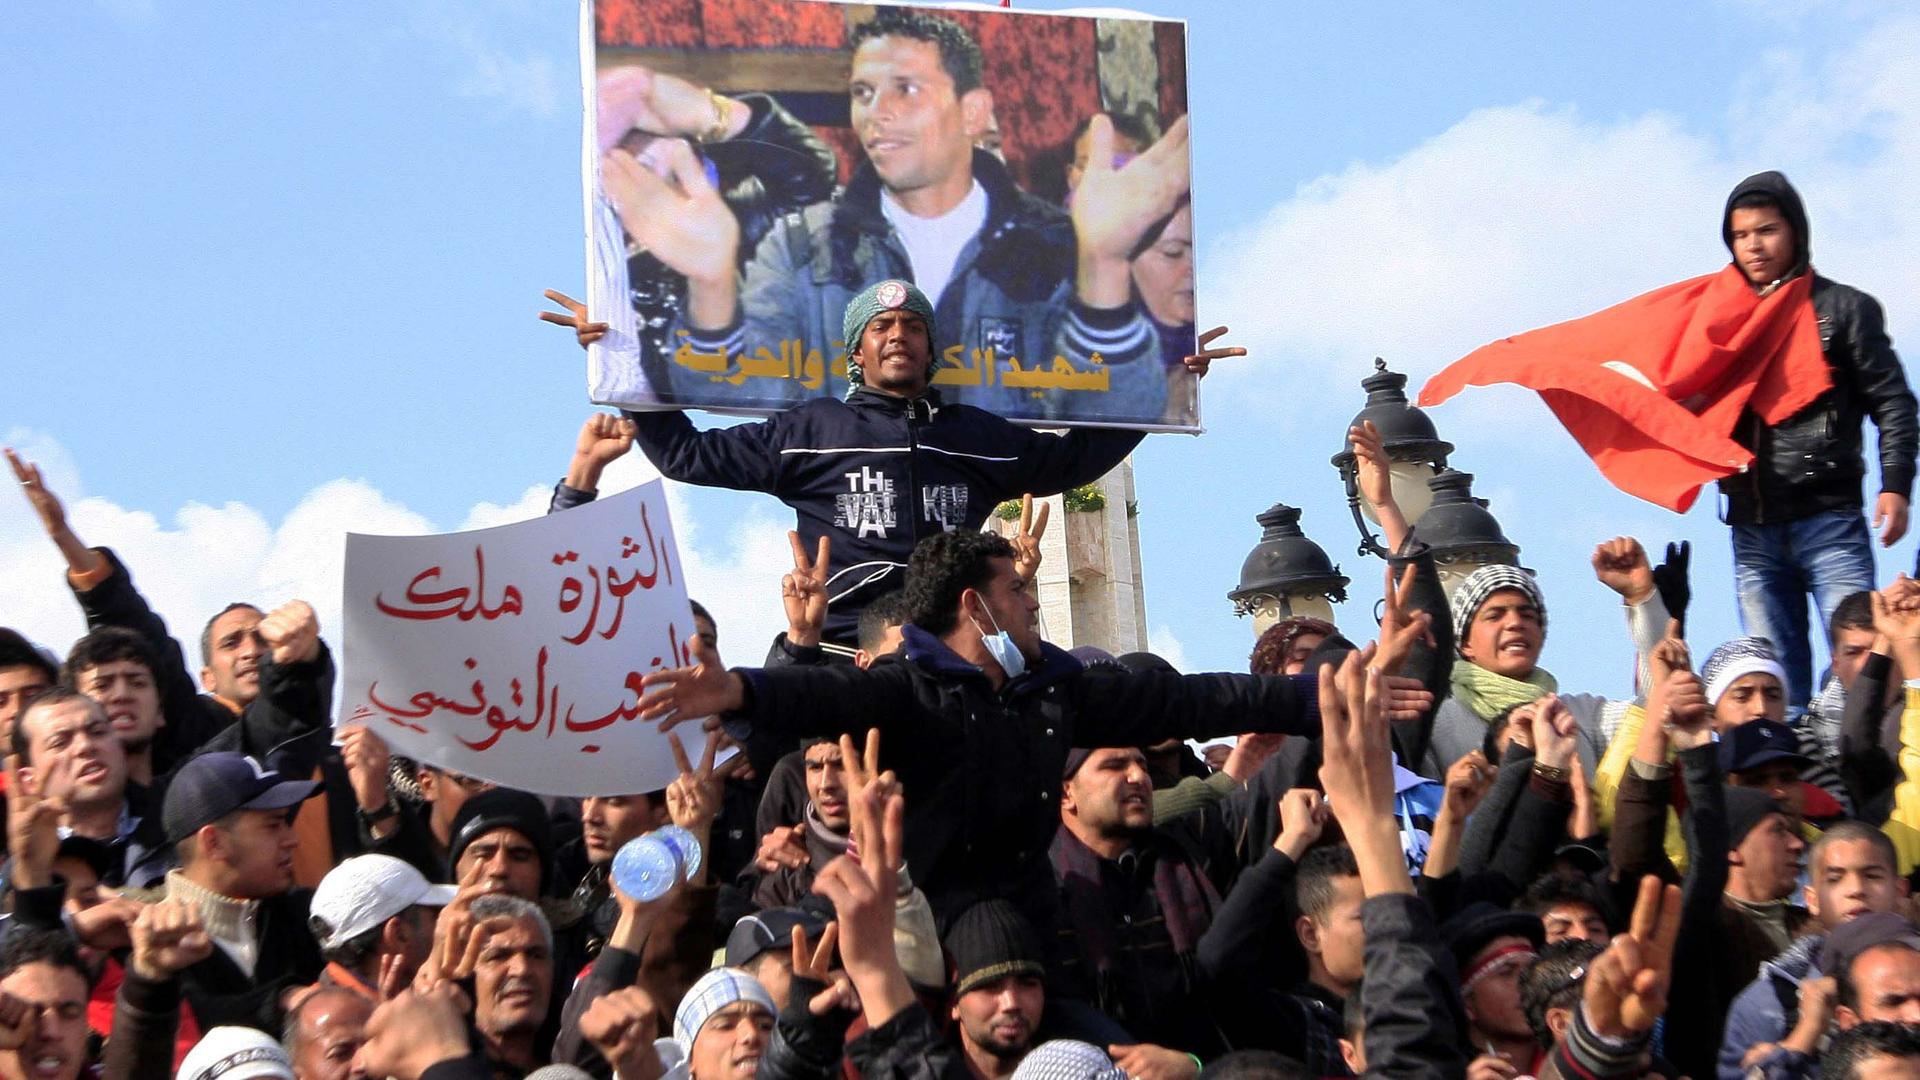 Tunisian protesters demonstrate beneath a poster of Mohamed Bouazizi near the prime minister's office in Tunis, Tunisia, Jan. 28, 2011. 